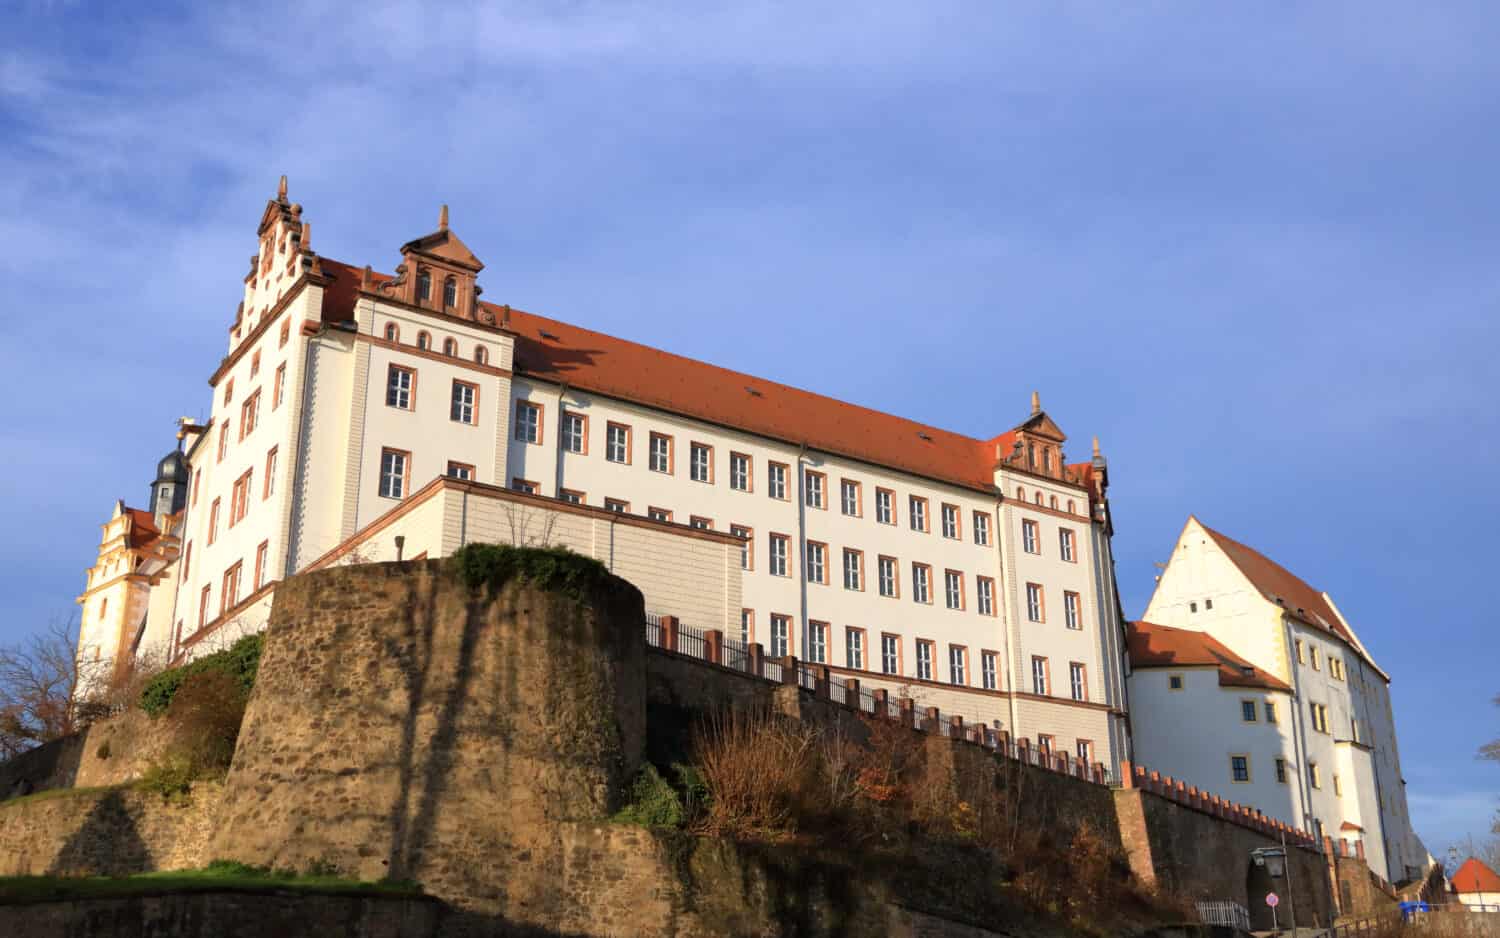 Colditz Castle, The famous World War II prison, Saxony in East Germany/Europe